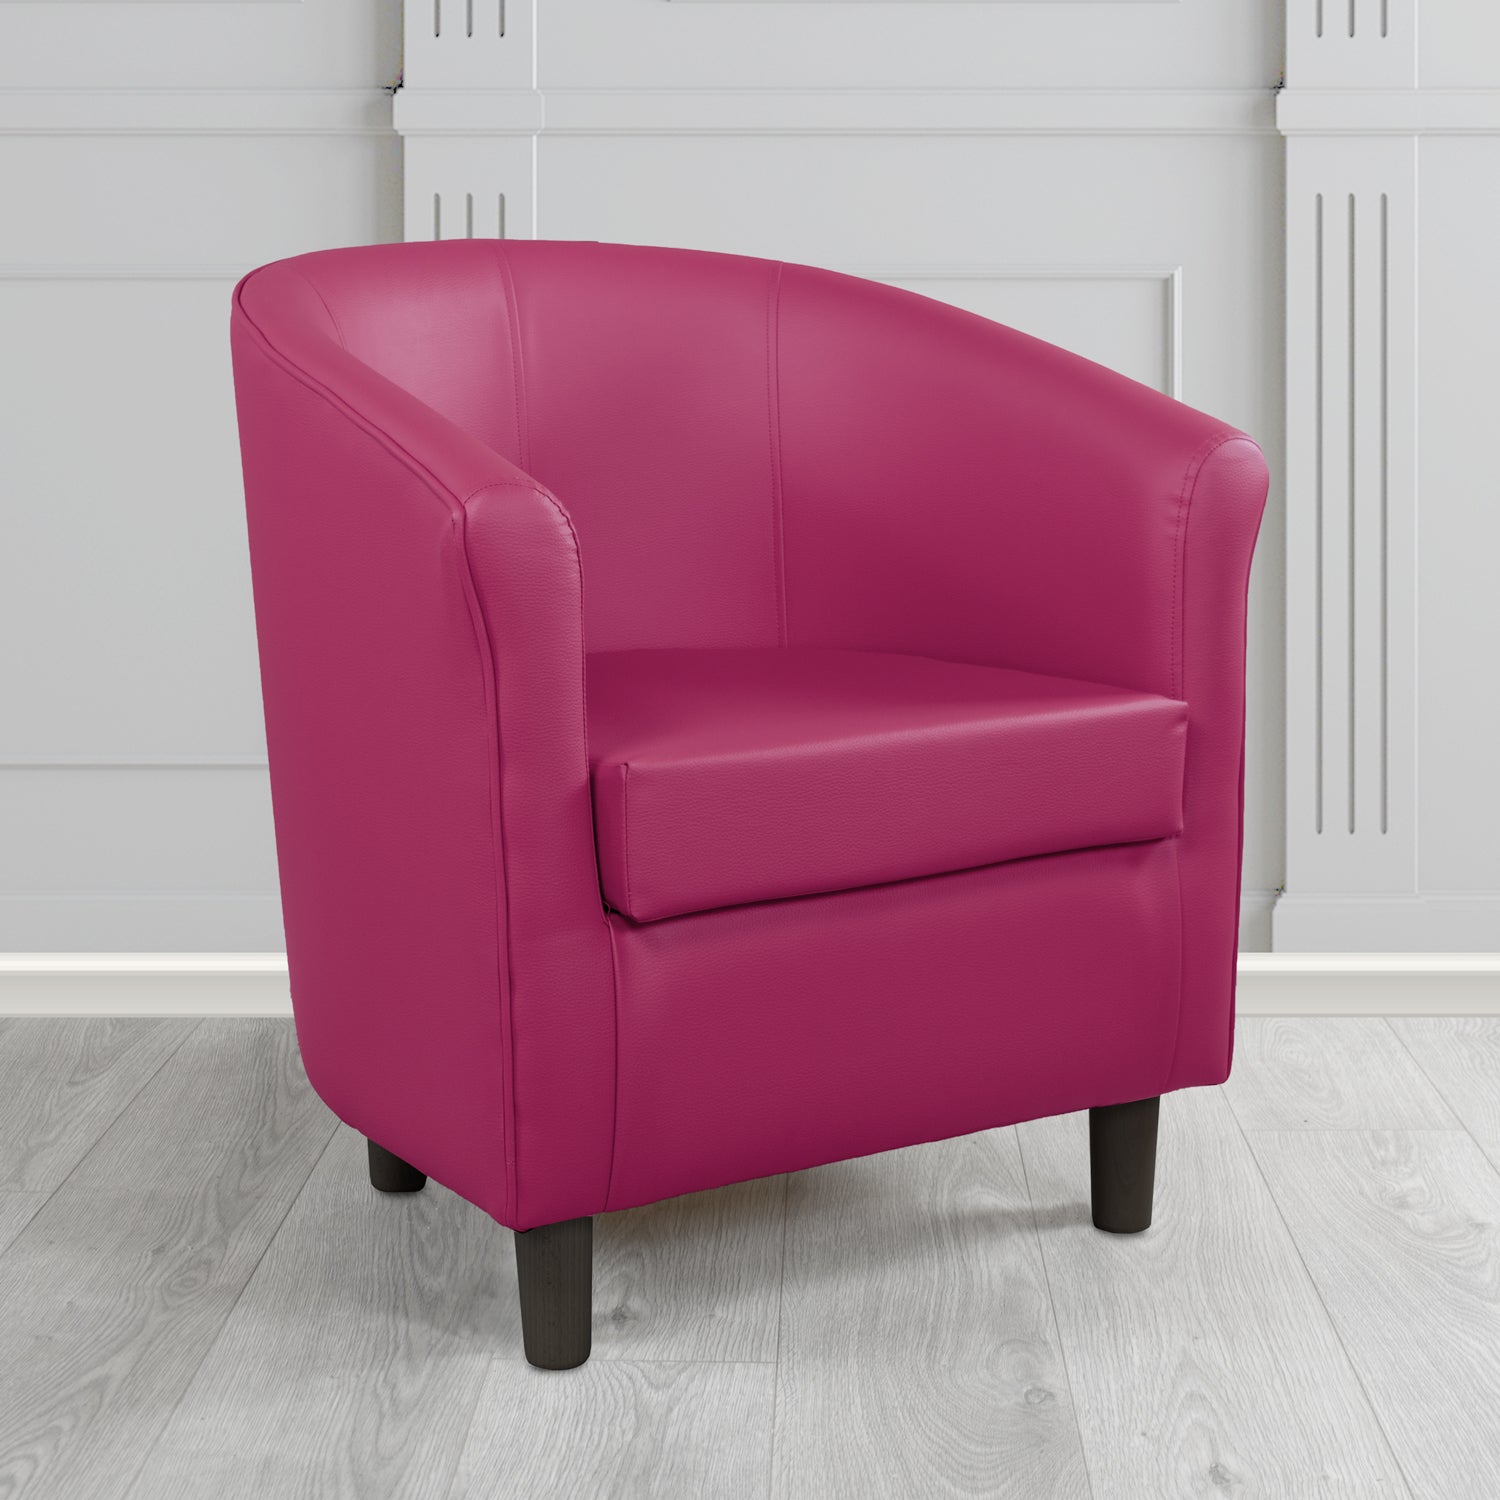 Tuscany Just Colour Raspberry Crush Antimicrobial Crib 5 Contract Faux Leather Tub Chair